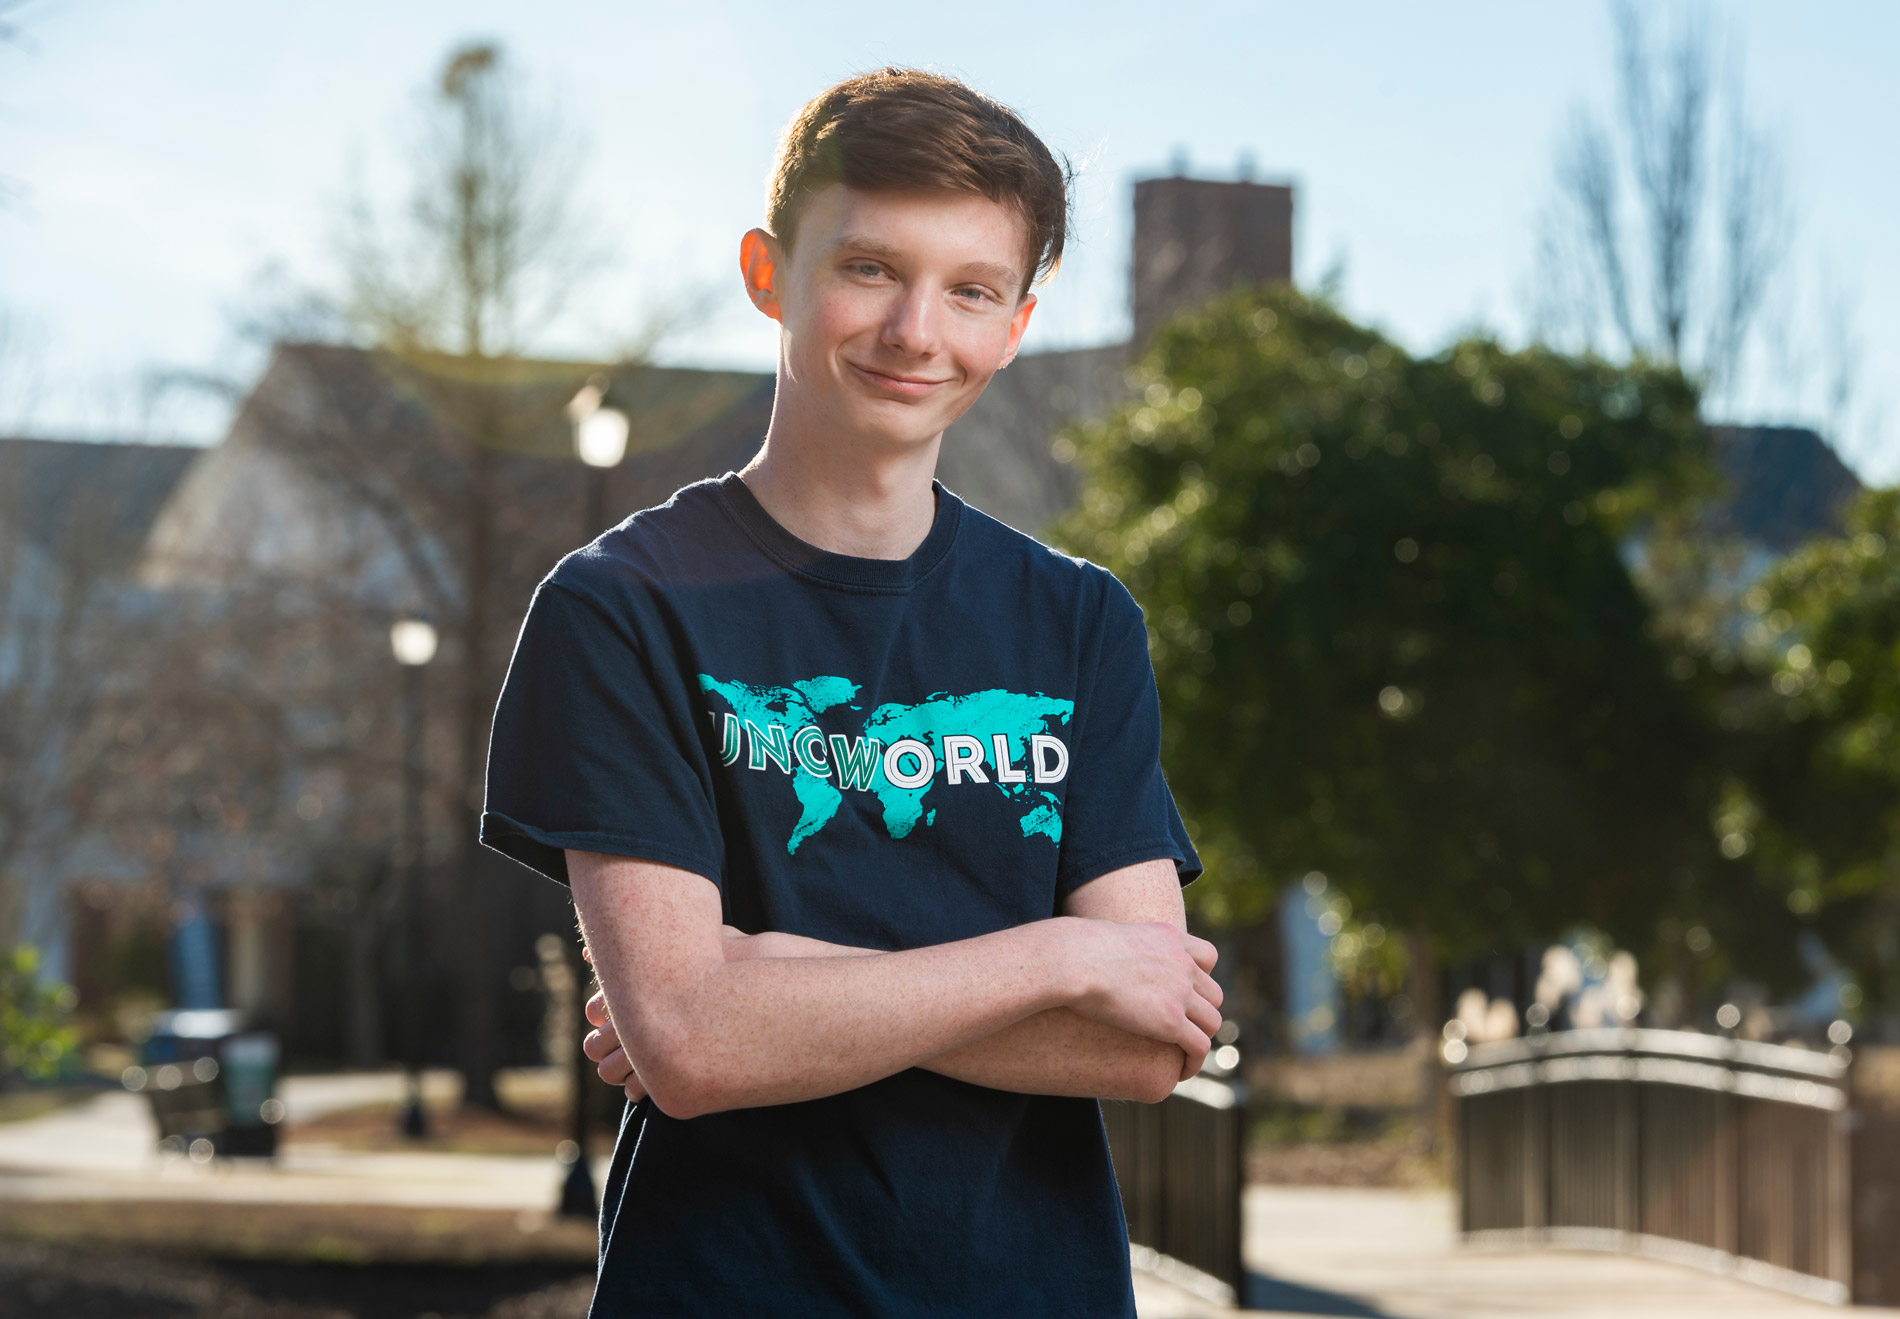 Skyler McLaughlin, a native of Jacksonville, NC, credits sociology and criminology professor Ann Rotchford for inspiring him to continue his education beyond undergraduate studies.